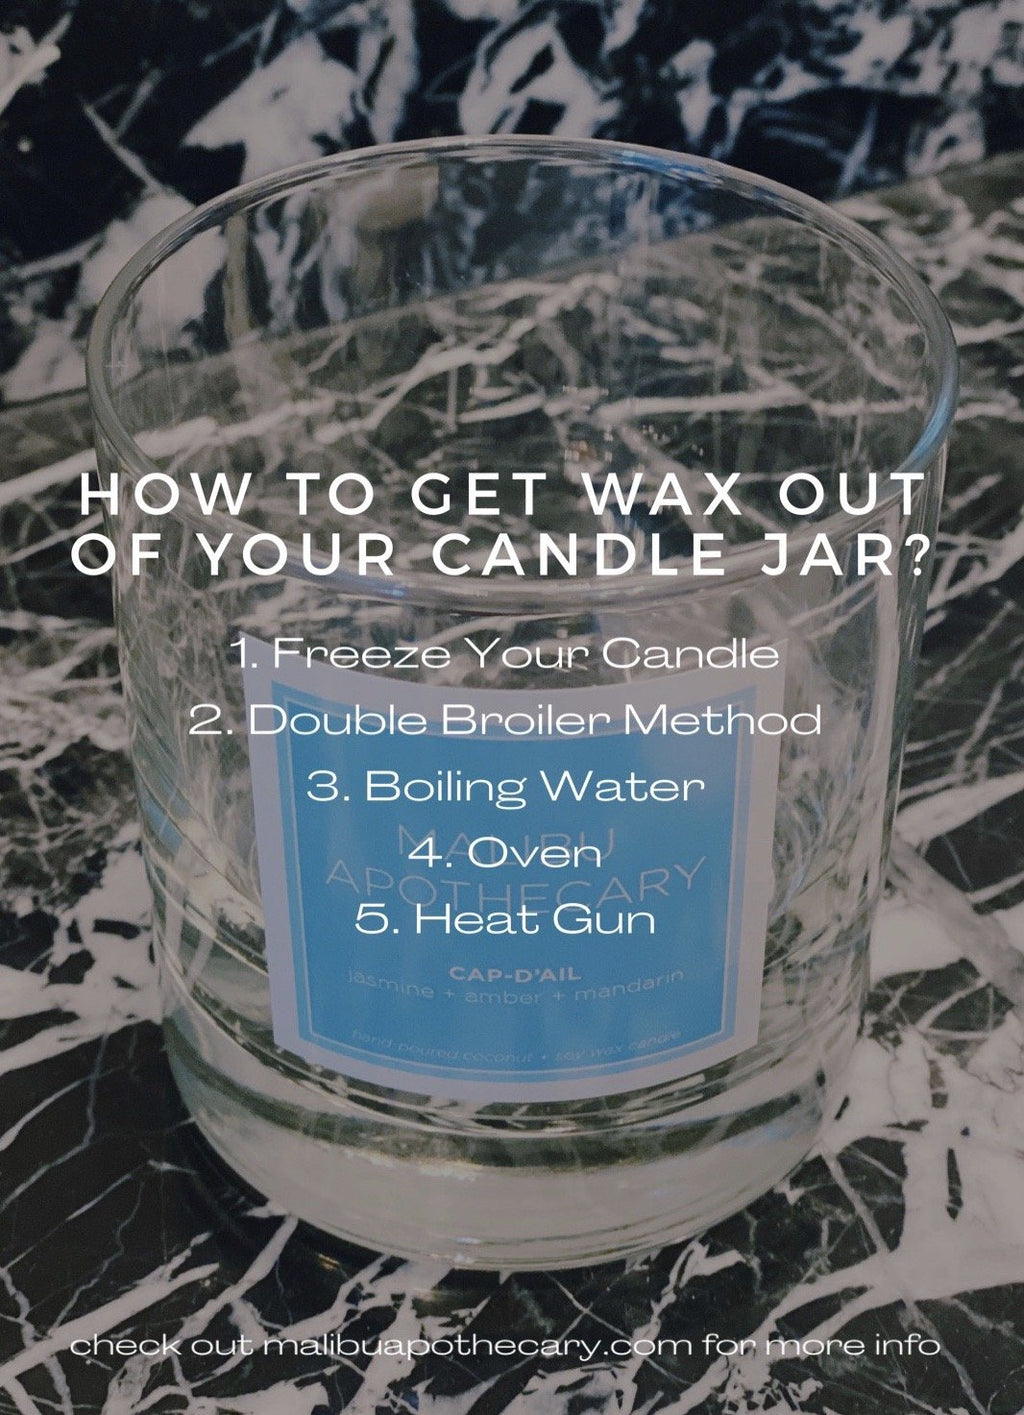 How to Get Wax Out of a Candle Jar 4 Ways (That Actually Work)